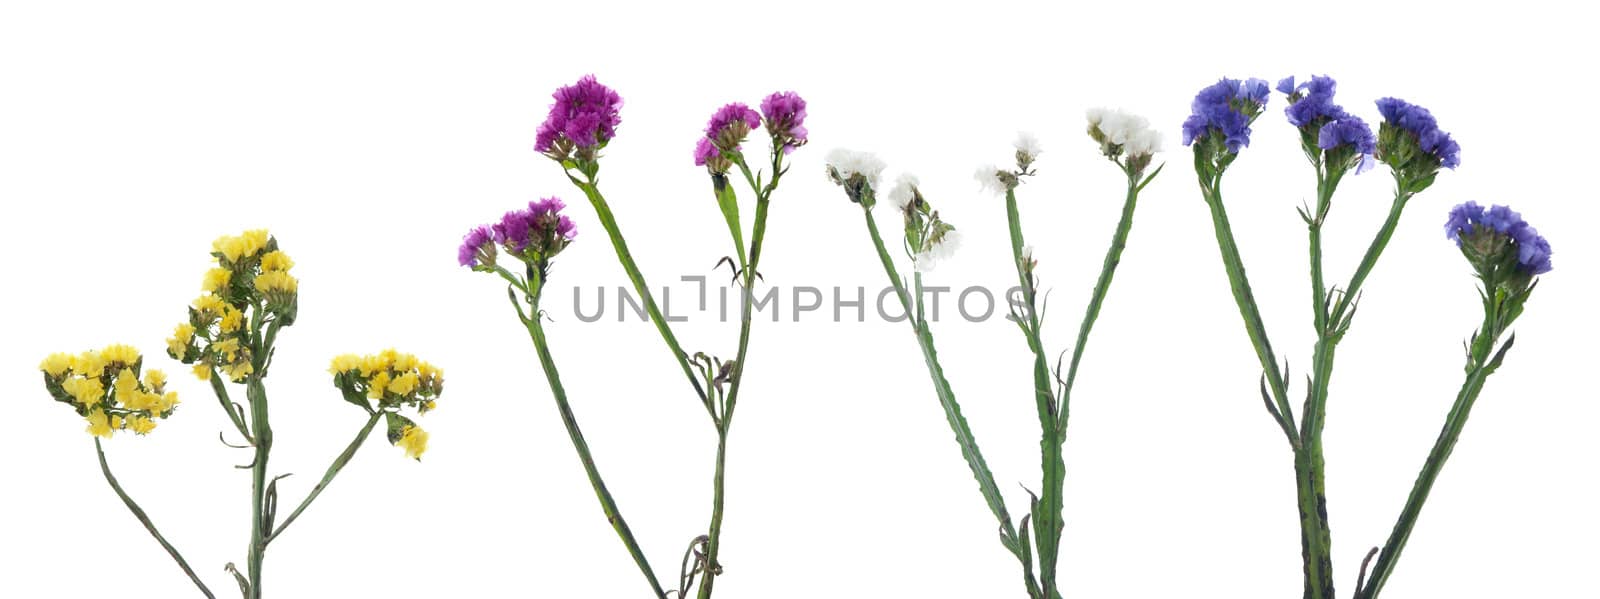 Statice flowers isolated on white background.